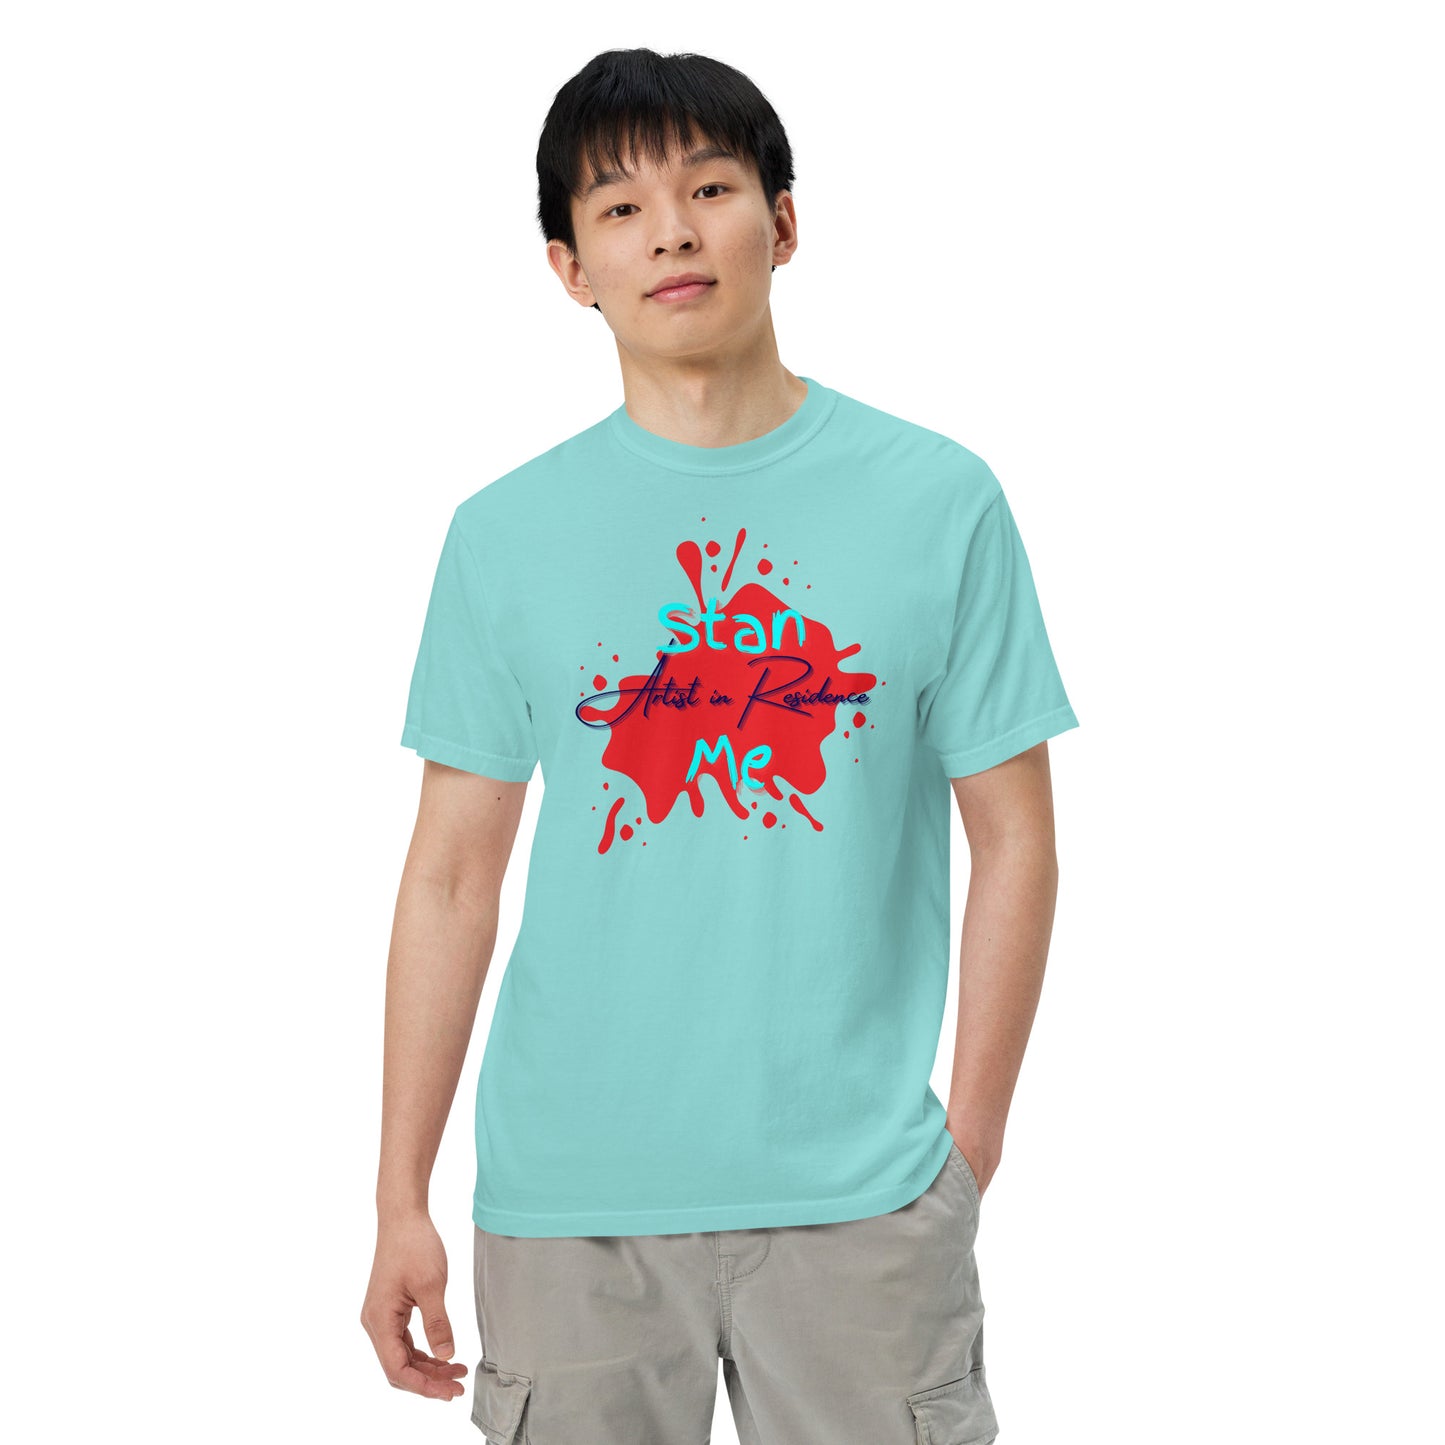 “Stan Me, Artist in Residence” tees featuring paint splatter designs, blending artistic creativity with stan culture. Available in 8 unique styles. Perfect for artists looking to attract fans and gigs. turquoise tee